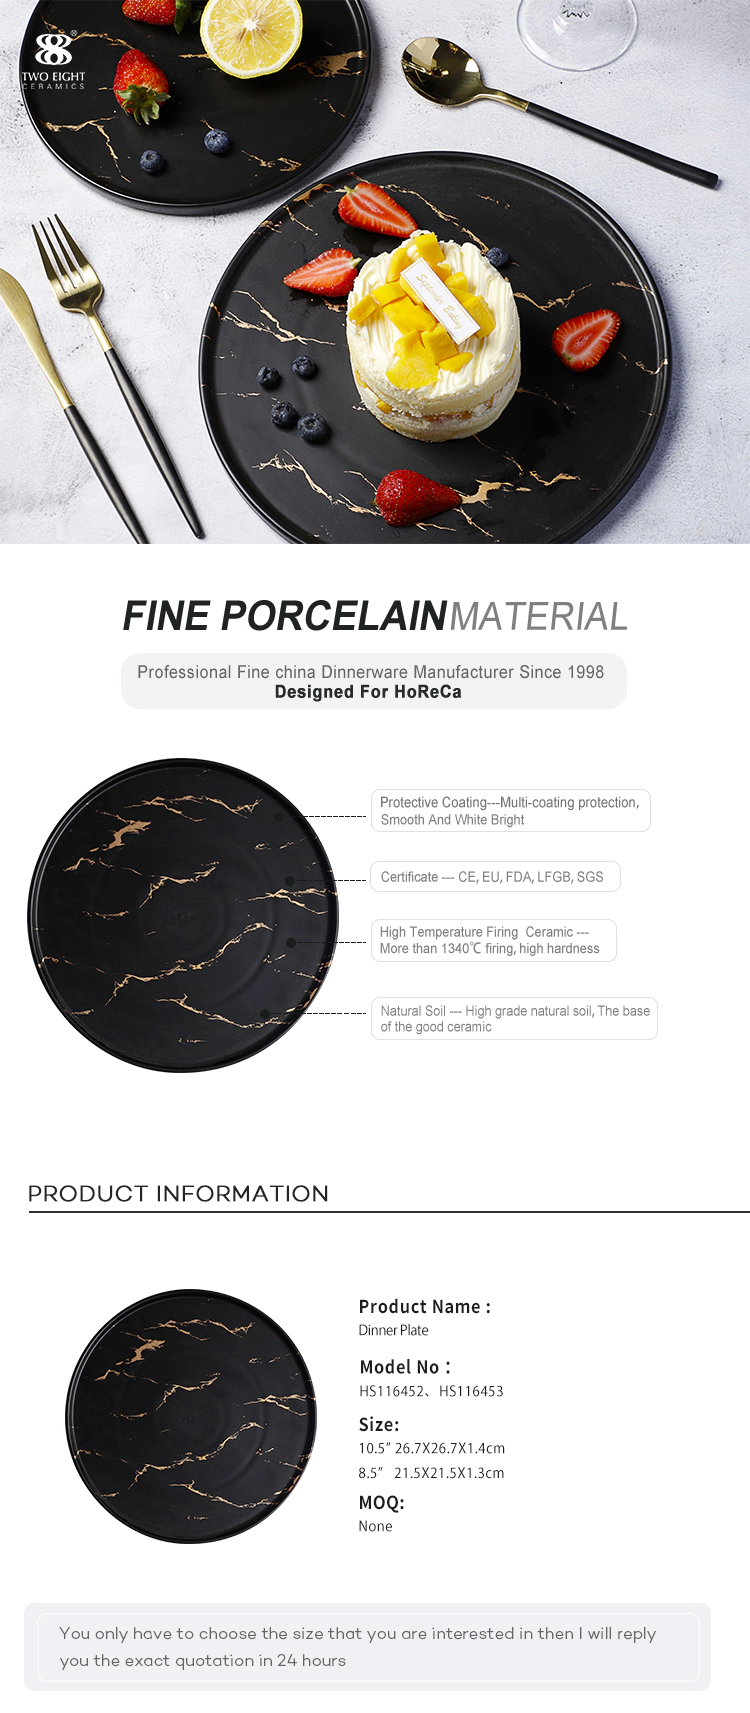 Best Selling Two Eight Black &Gold Decal Marble Stone Plate, Durable Hotel Use Black &Gold Decal 8.5/10.5 Inch Marble Dish~